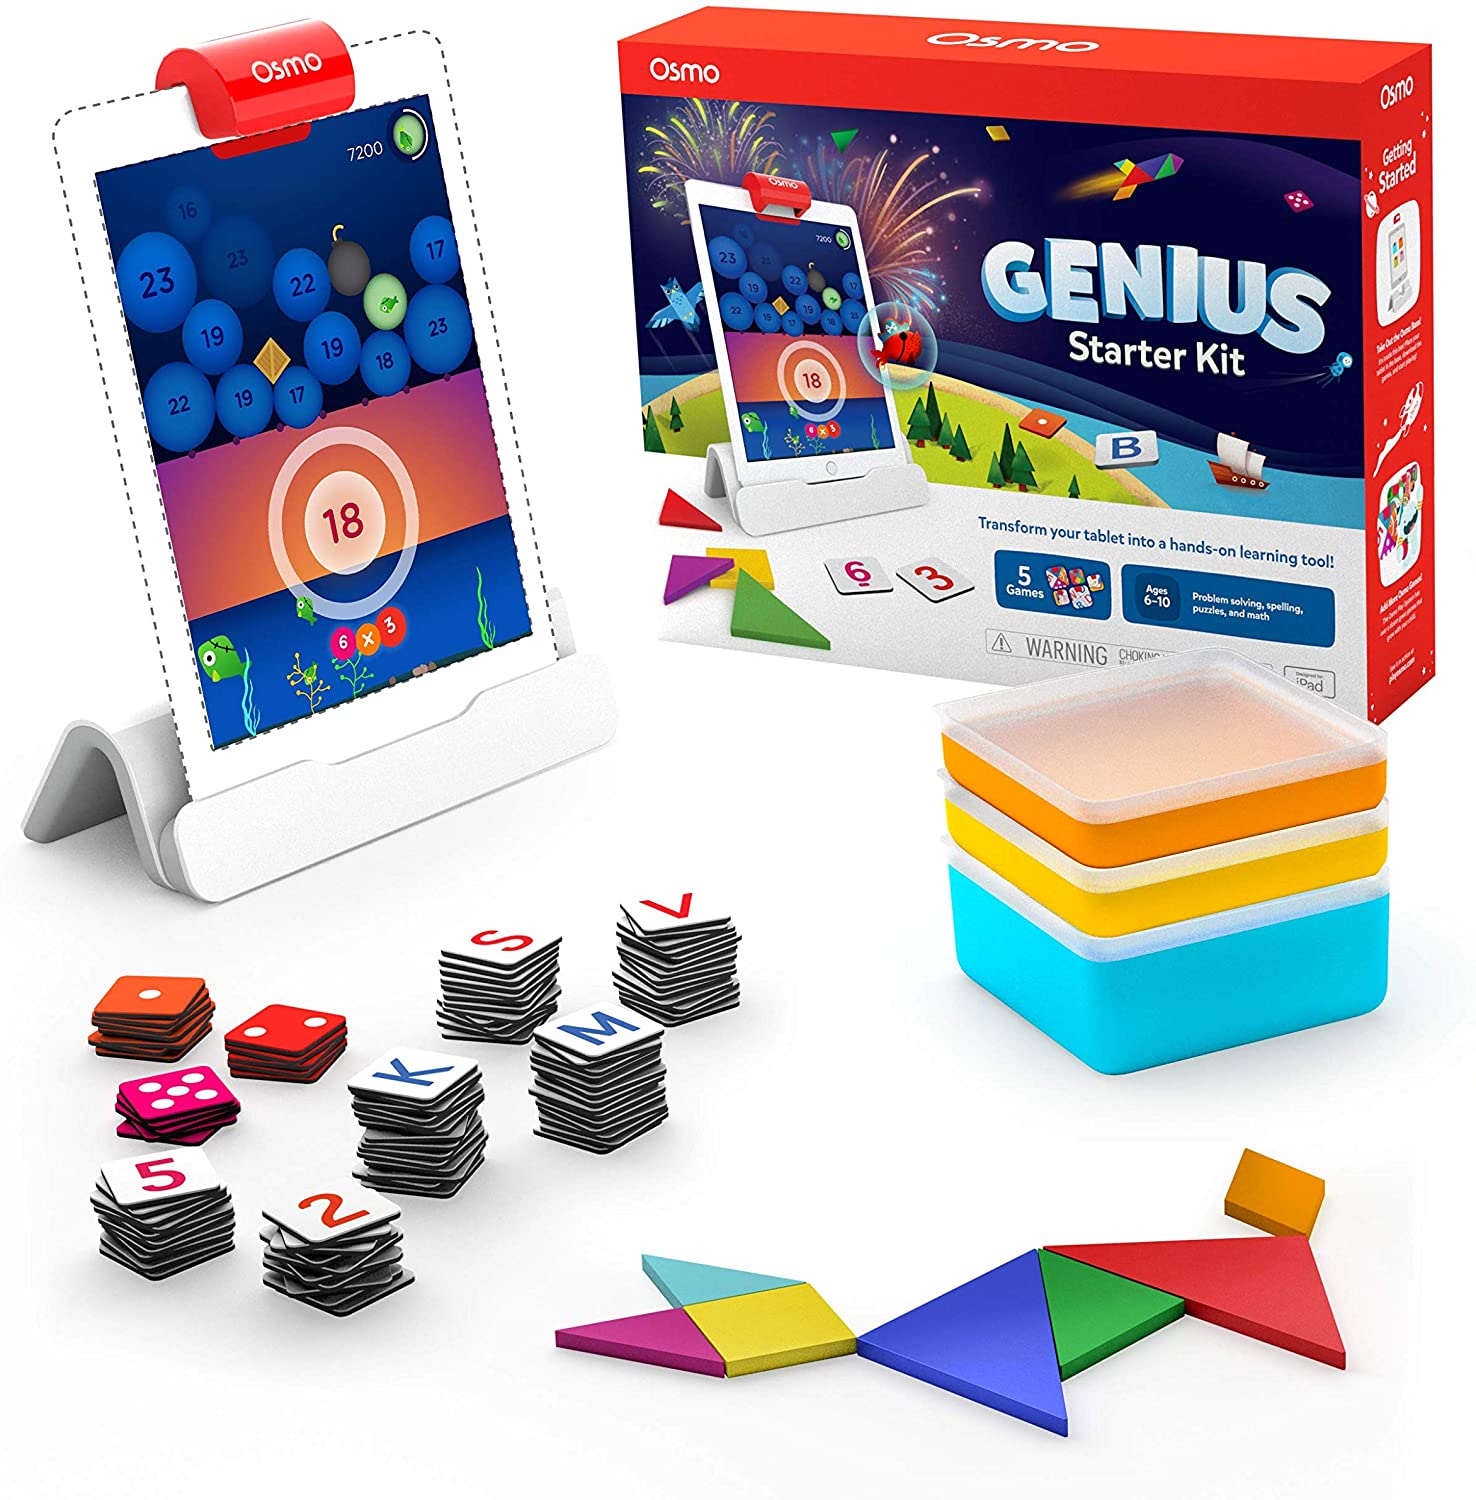 Featured image for “Elektronisches Spielzeug mit App: Osmo Starter Kit (Tangible Play)”